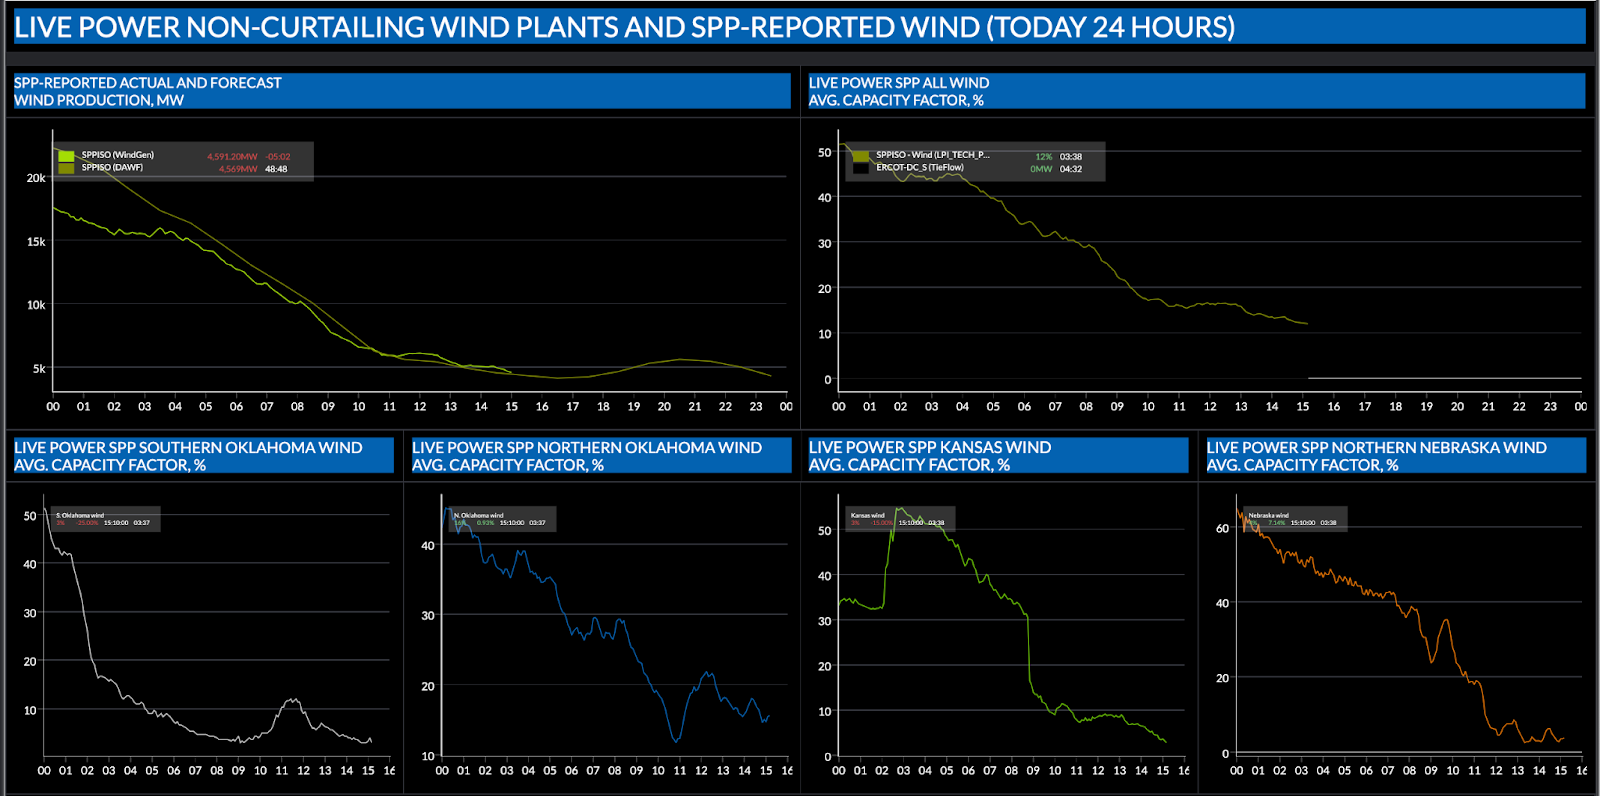 Live Power non-curtailing wind plants and SPP-reported wind 